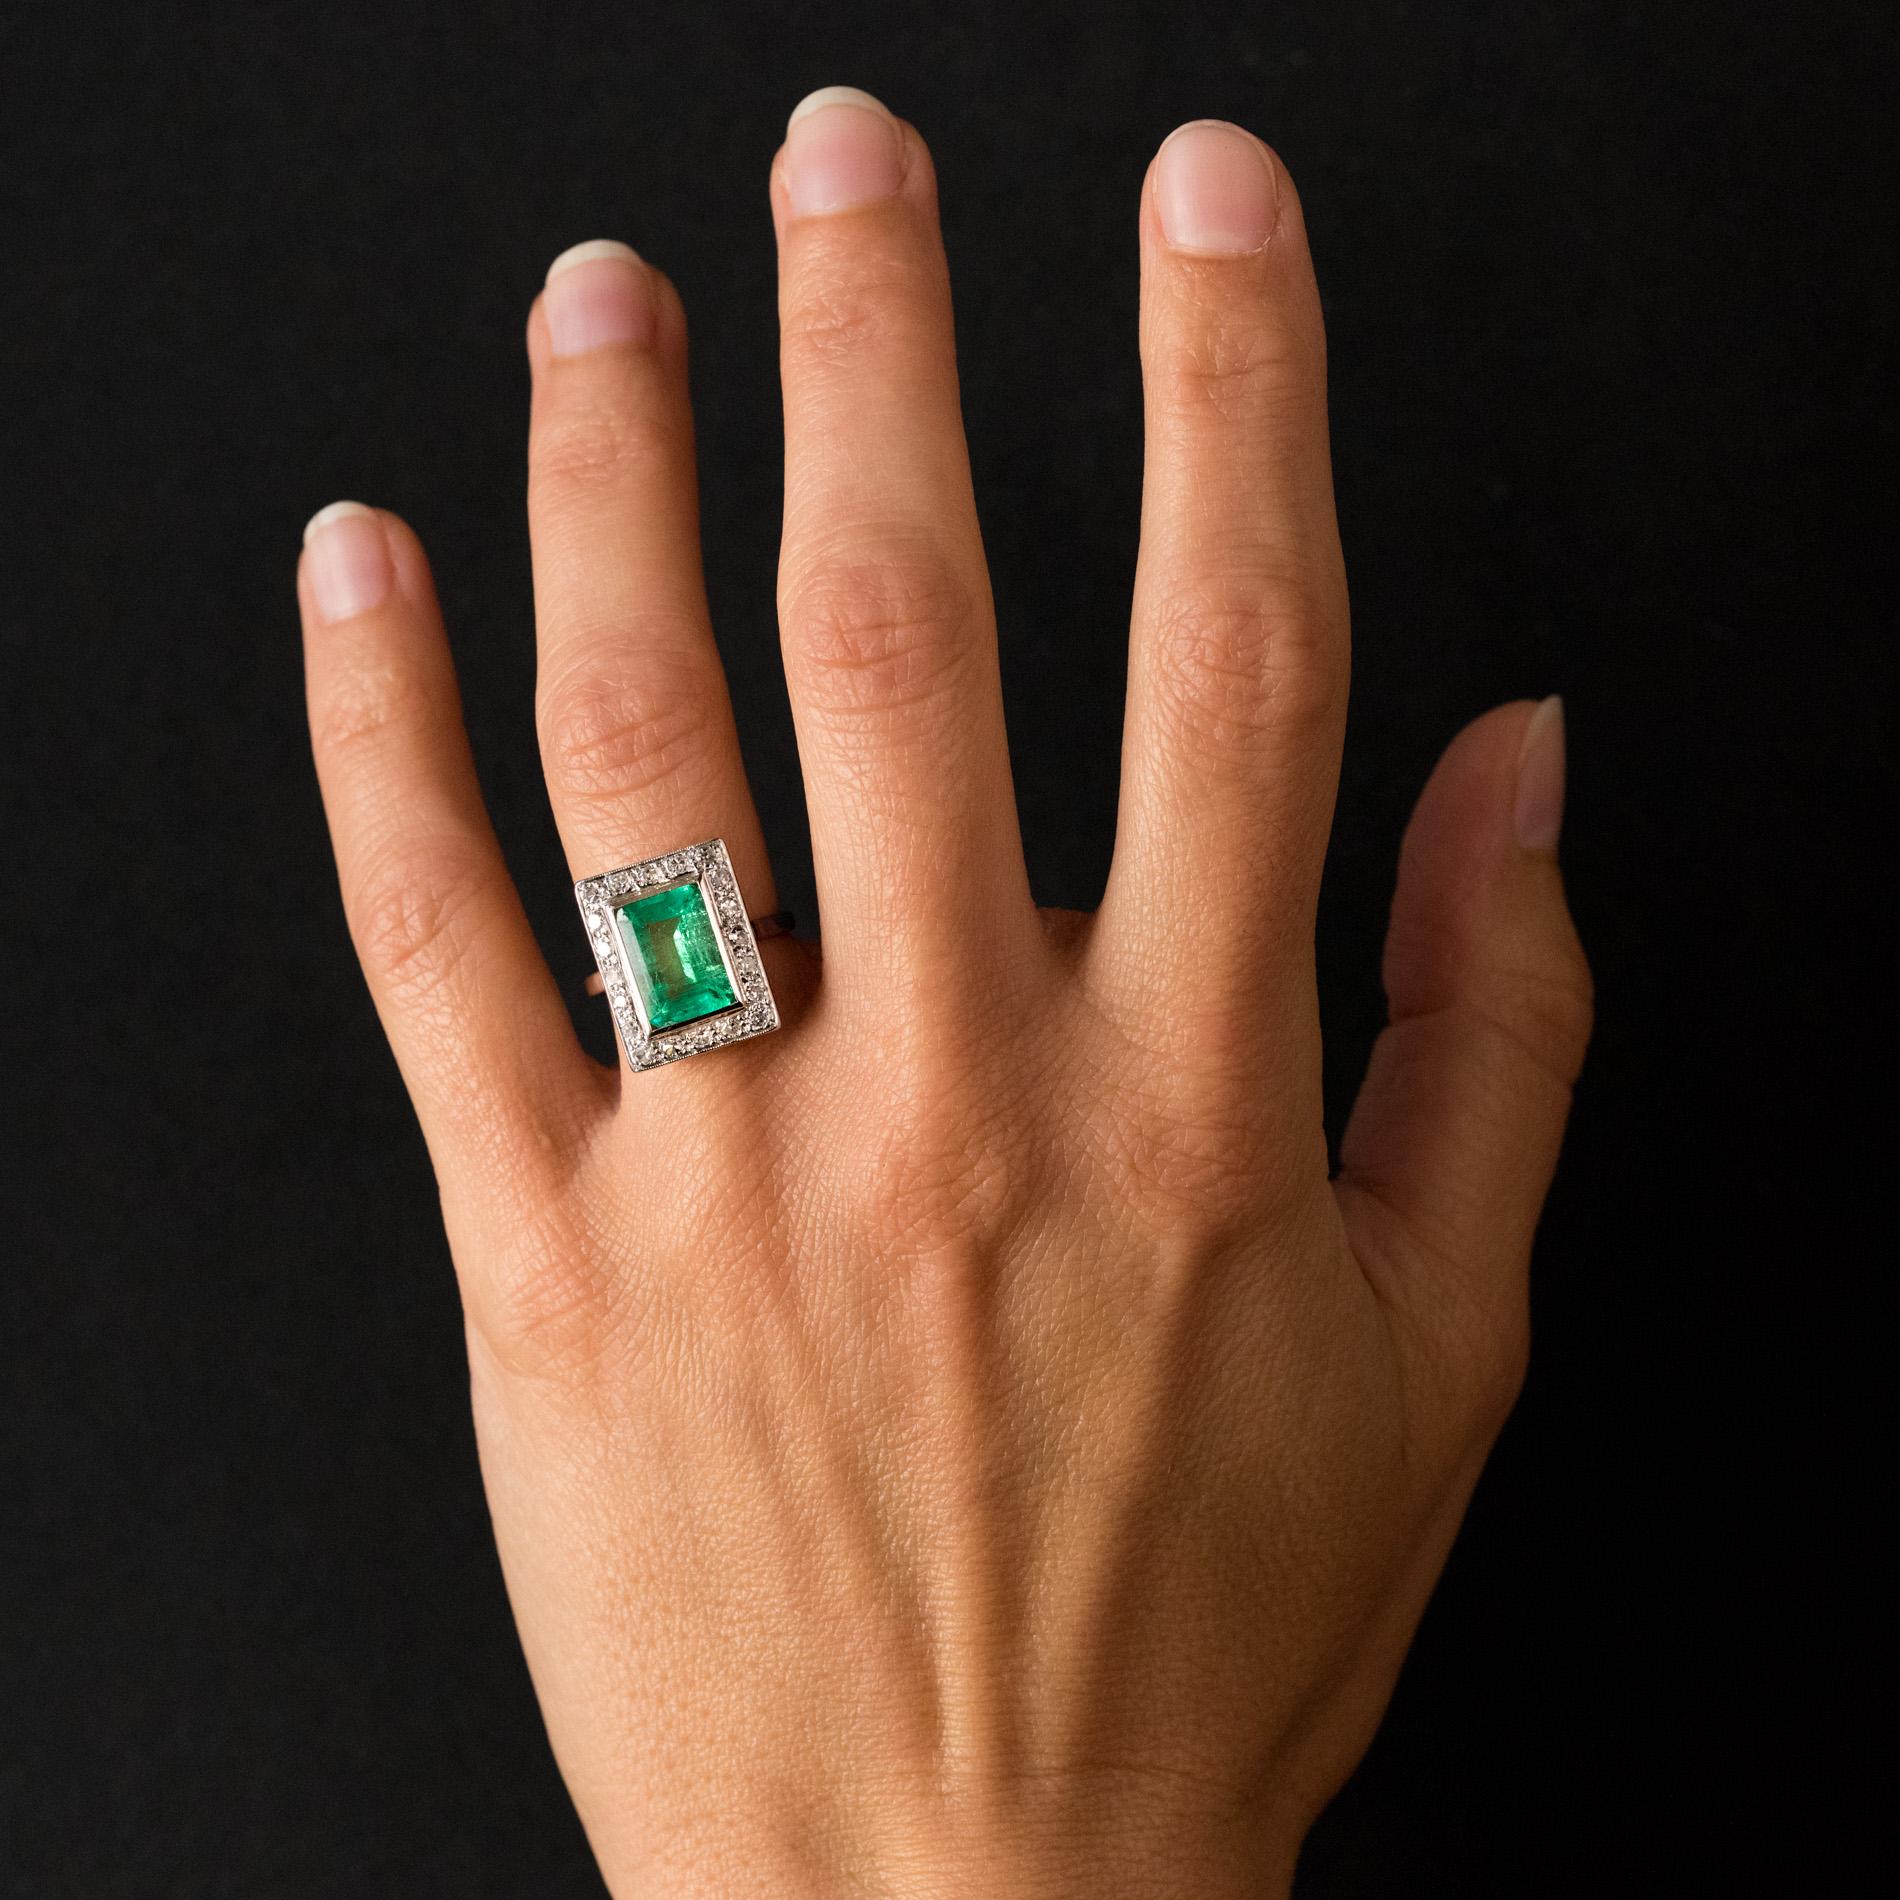 Ring in platinum and 18 karats white gold, eagle's head hallmark.
Rectangular, this beautiful authentic art deco ring is adorned, in closed setting, with a degrees-cut emerald, surrounded by diamonds. The basket is delicately perforated to let the